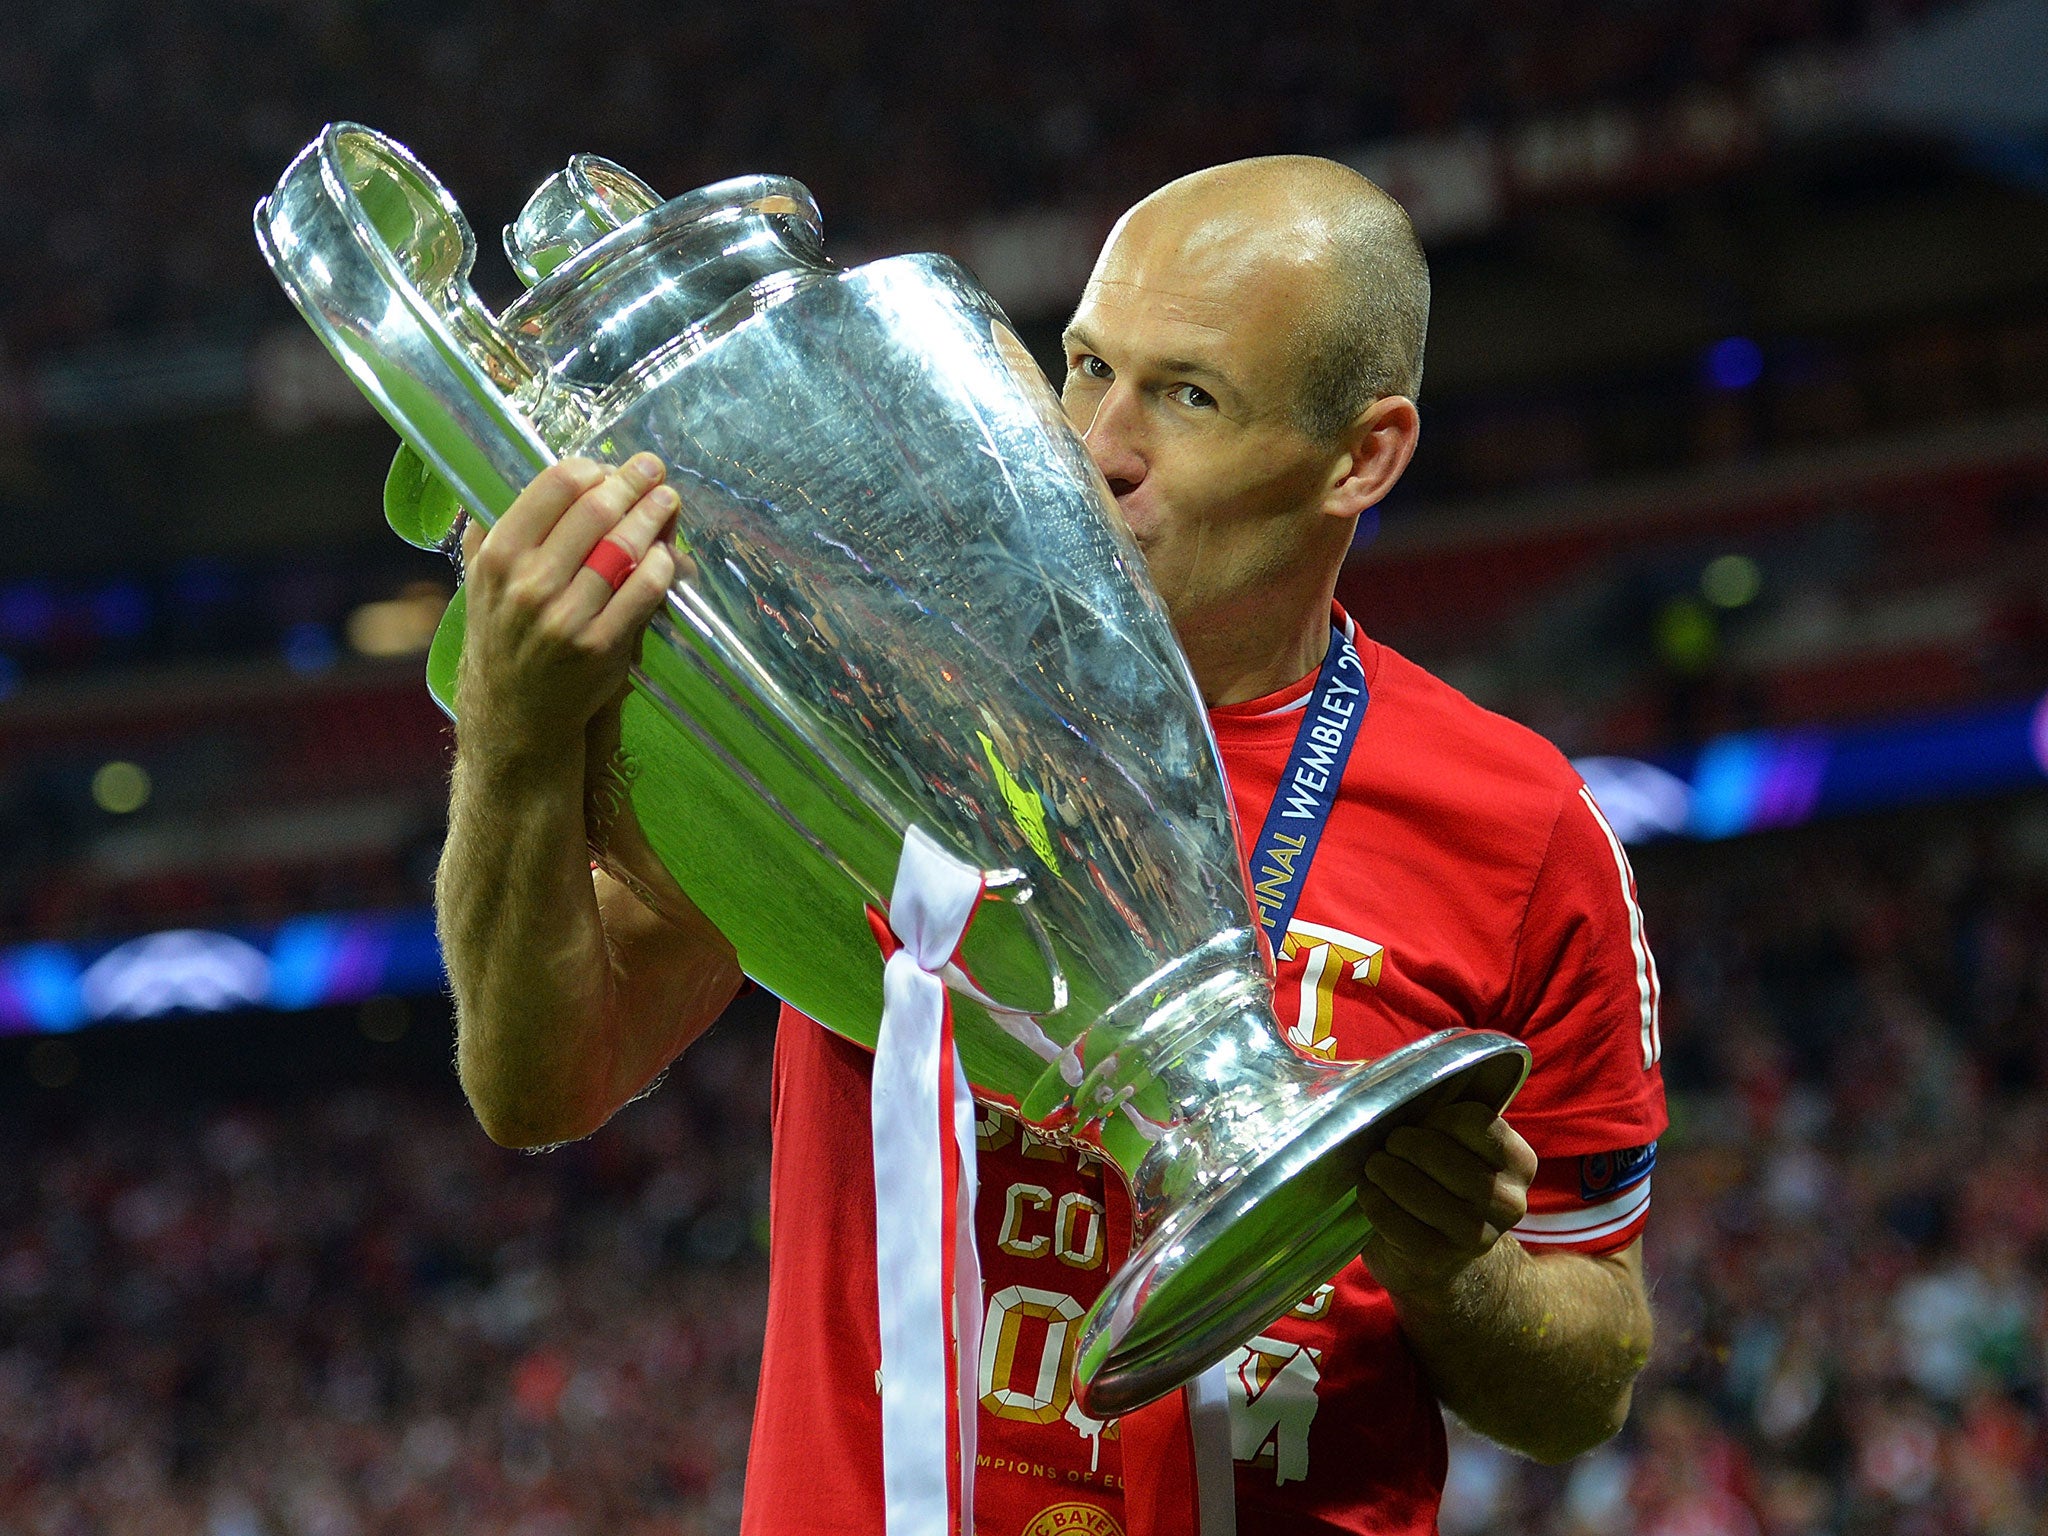 Arjen Robben's redemption came when he helped Bayern Munich win the 2012/13 Champions League